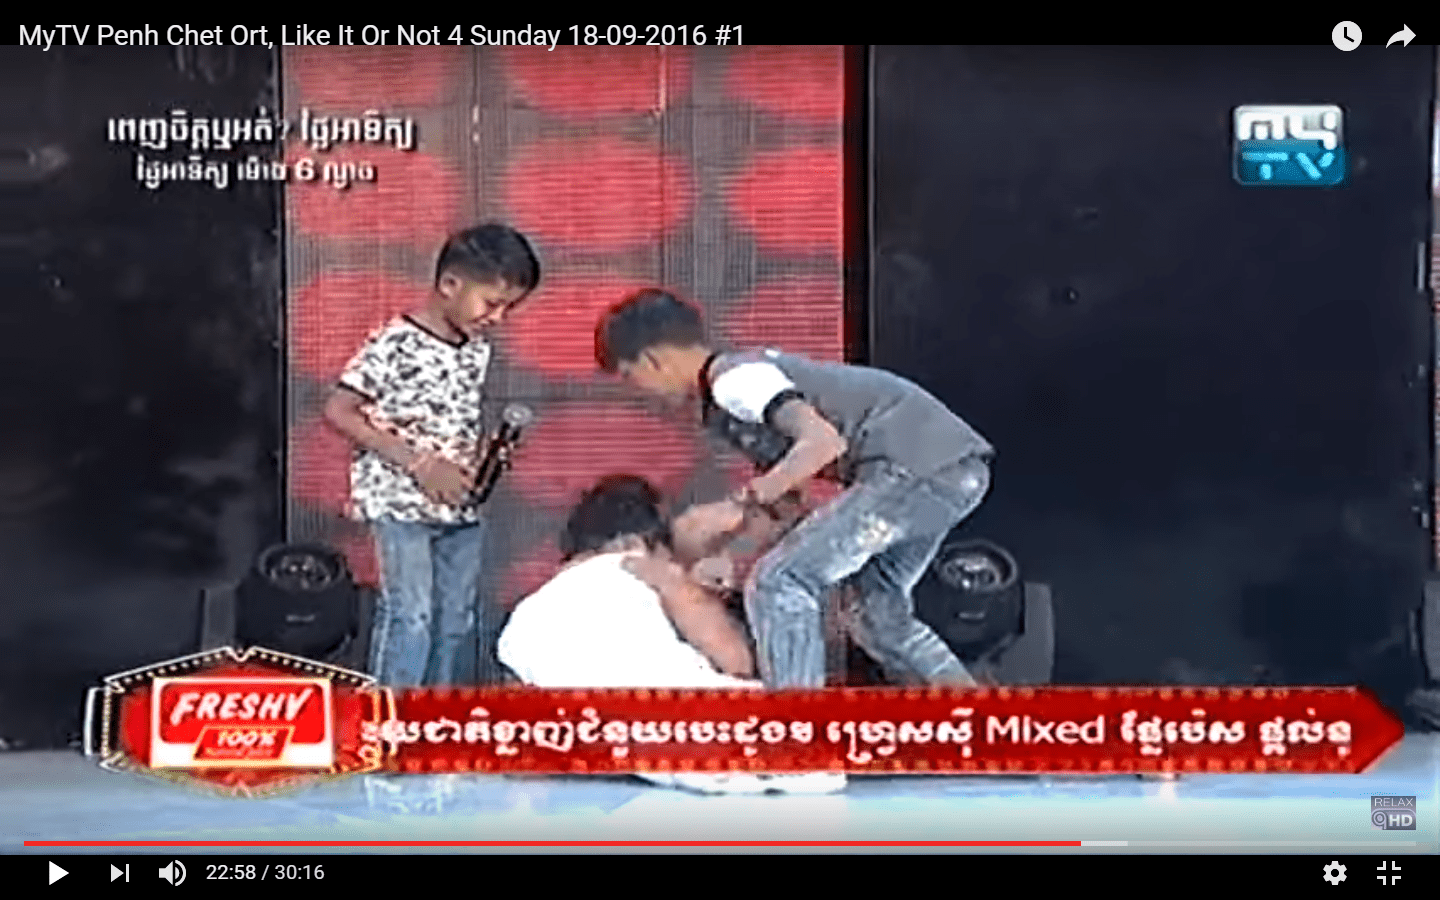 A girl was repeatedly hit and kicked by a boy in a comedy segment of a popular weekend variety show called “Like it or Not?” (Source: The Asia Foundation’s Media Monitoring Research) 